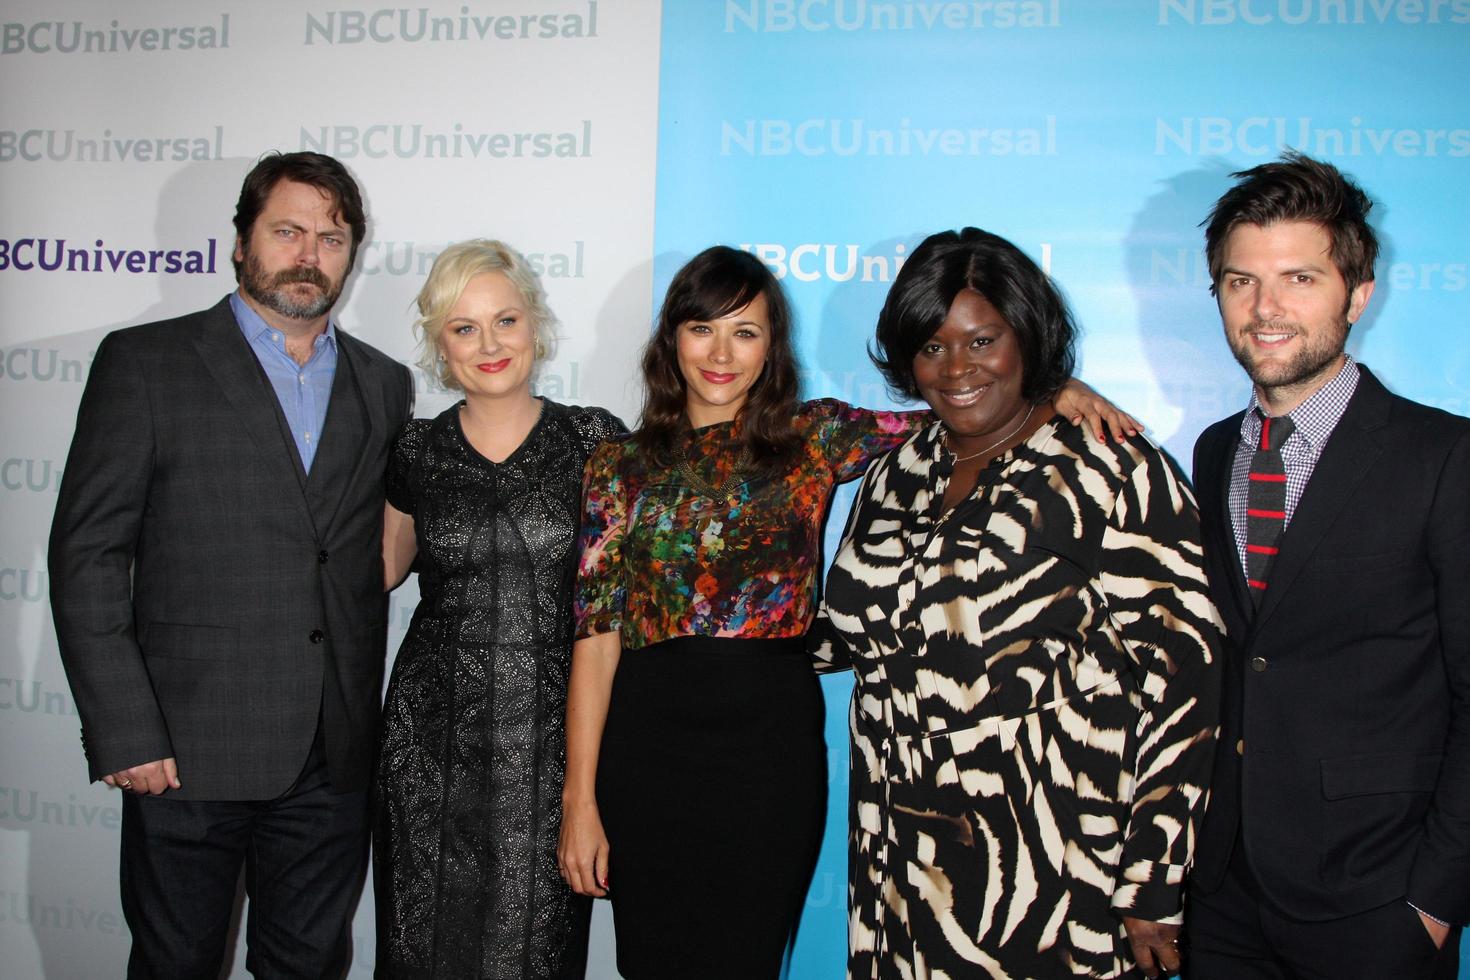 LOS ANGELES, JAN 6 - Amy Poehler, Parks and Recreaton cast arrives at the NBC Universal All-Star Winter TCA Party at The Athenauem on January 6, 2012 in Pasadena, CA photo